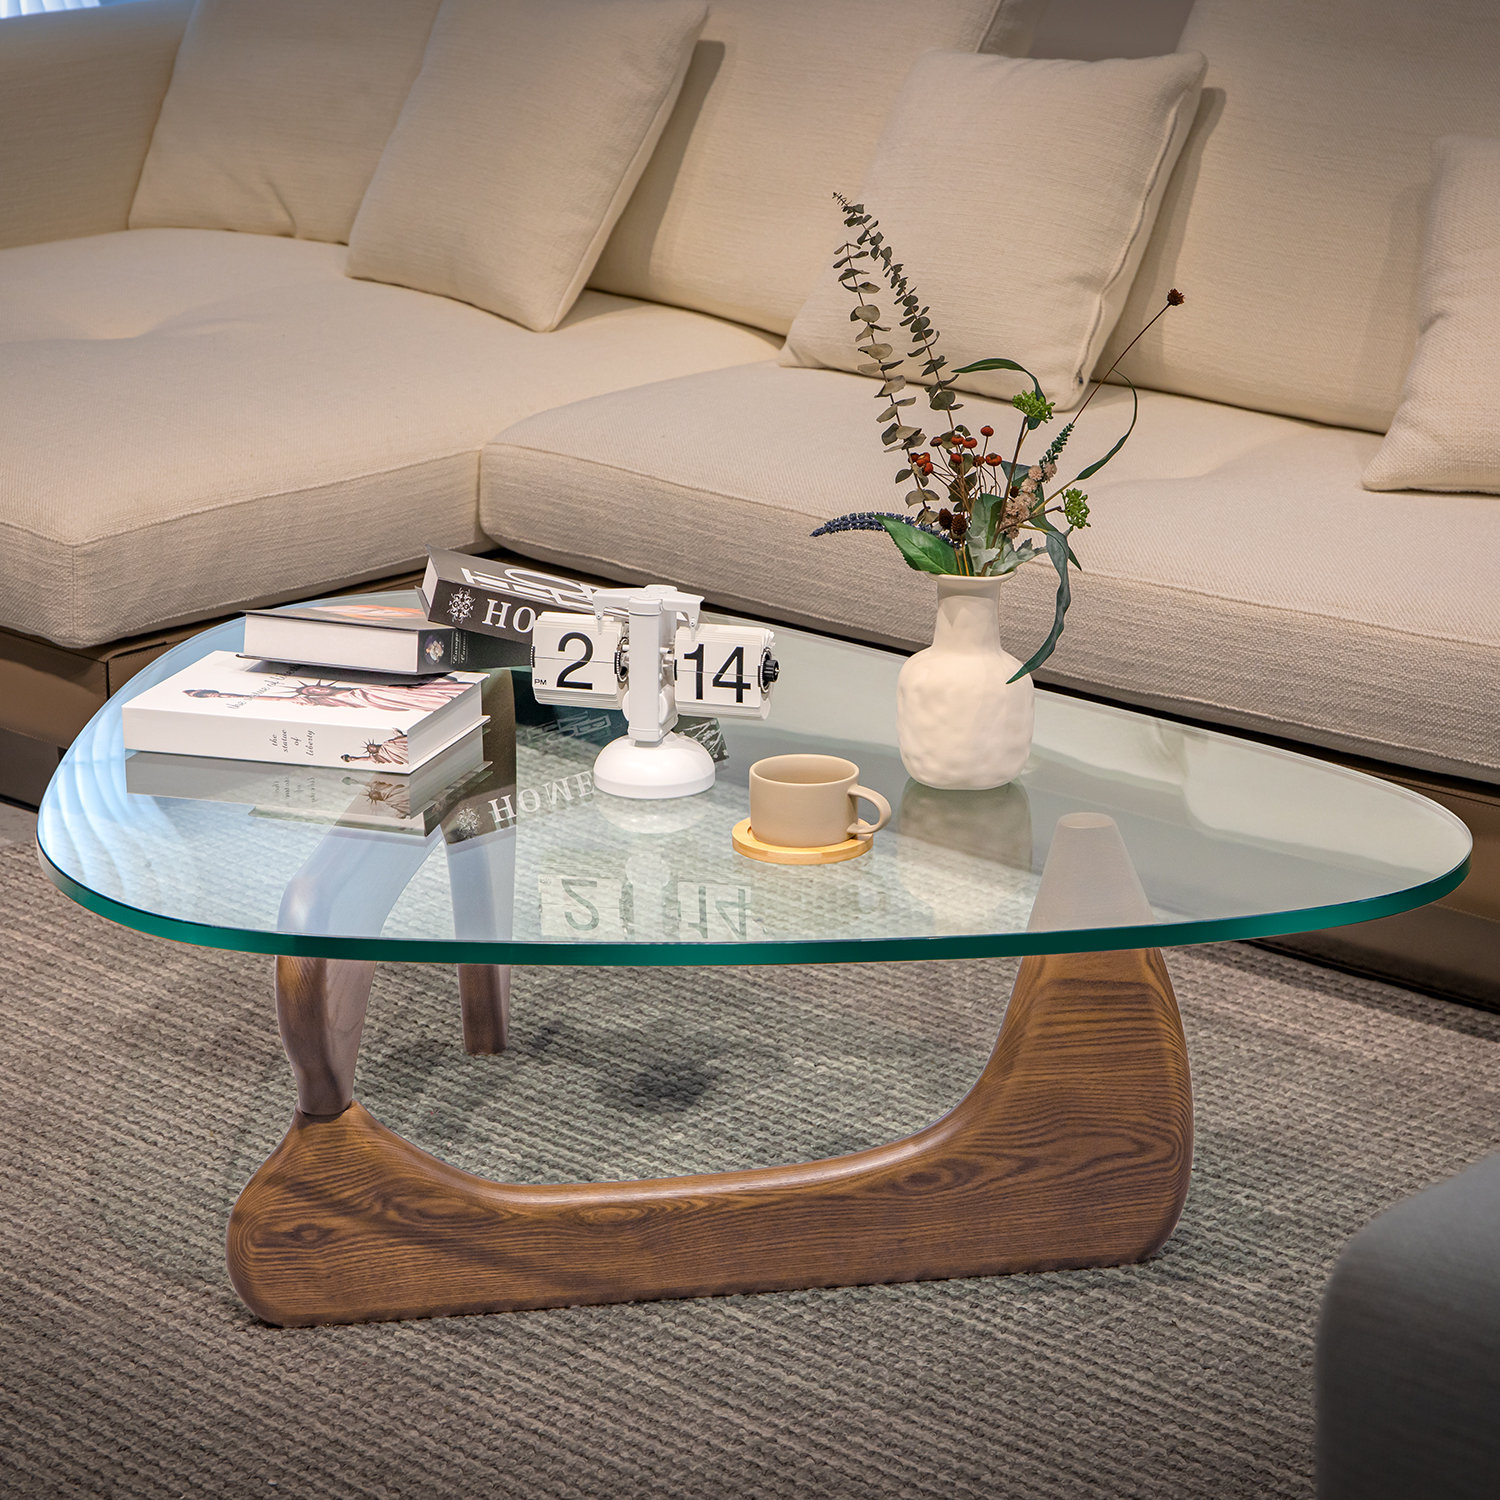 Round Tray Table With Mirrored Glass Top Removable Tray Coffee Table Living  Room